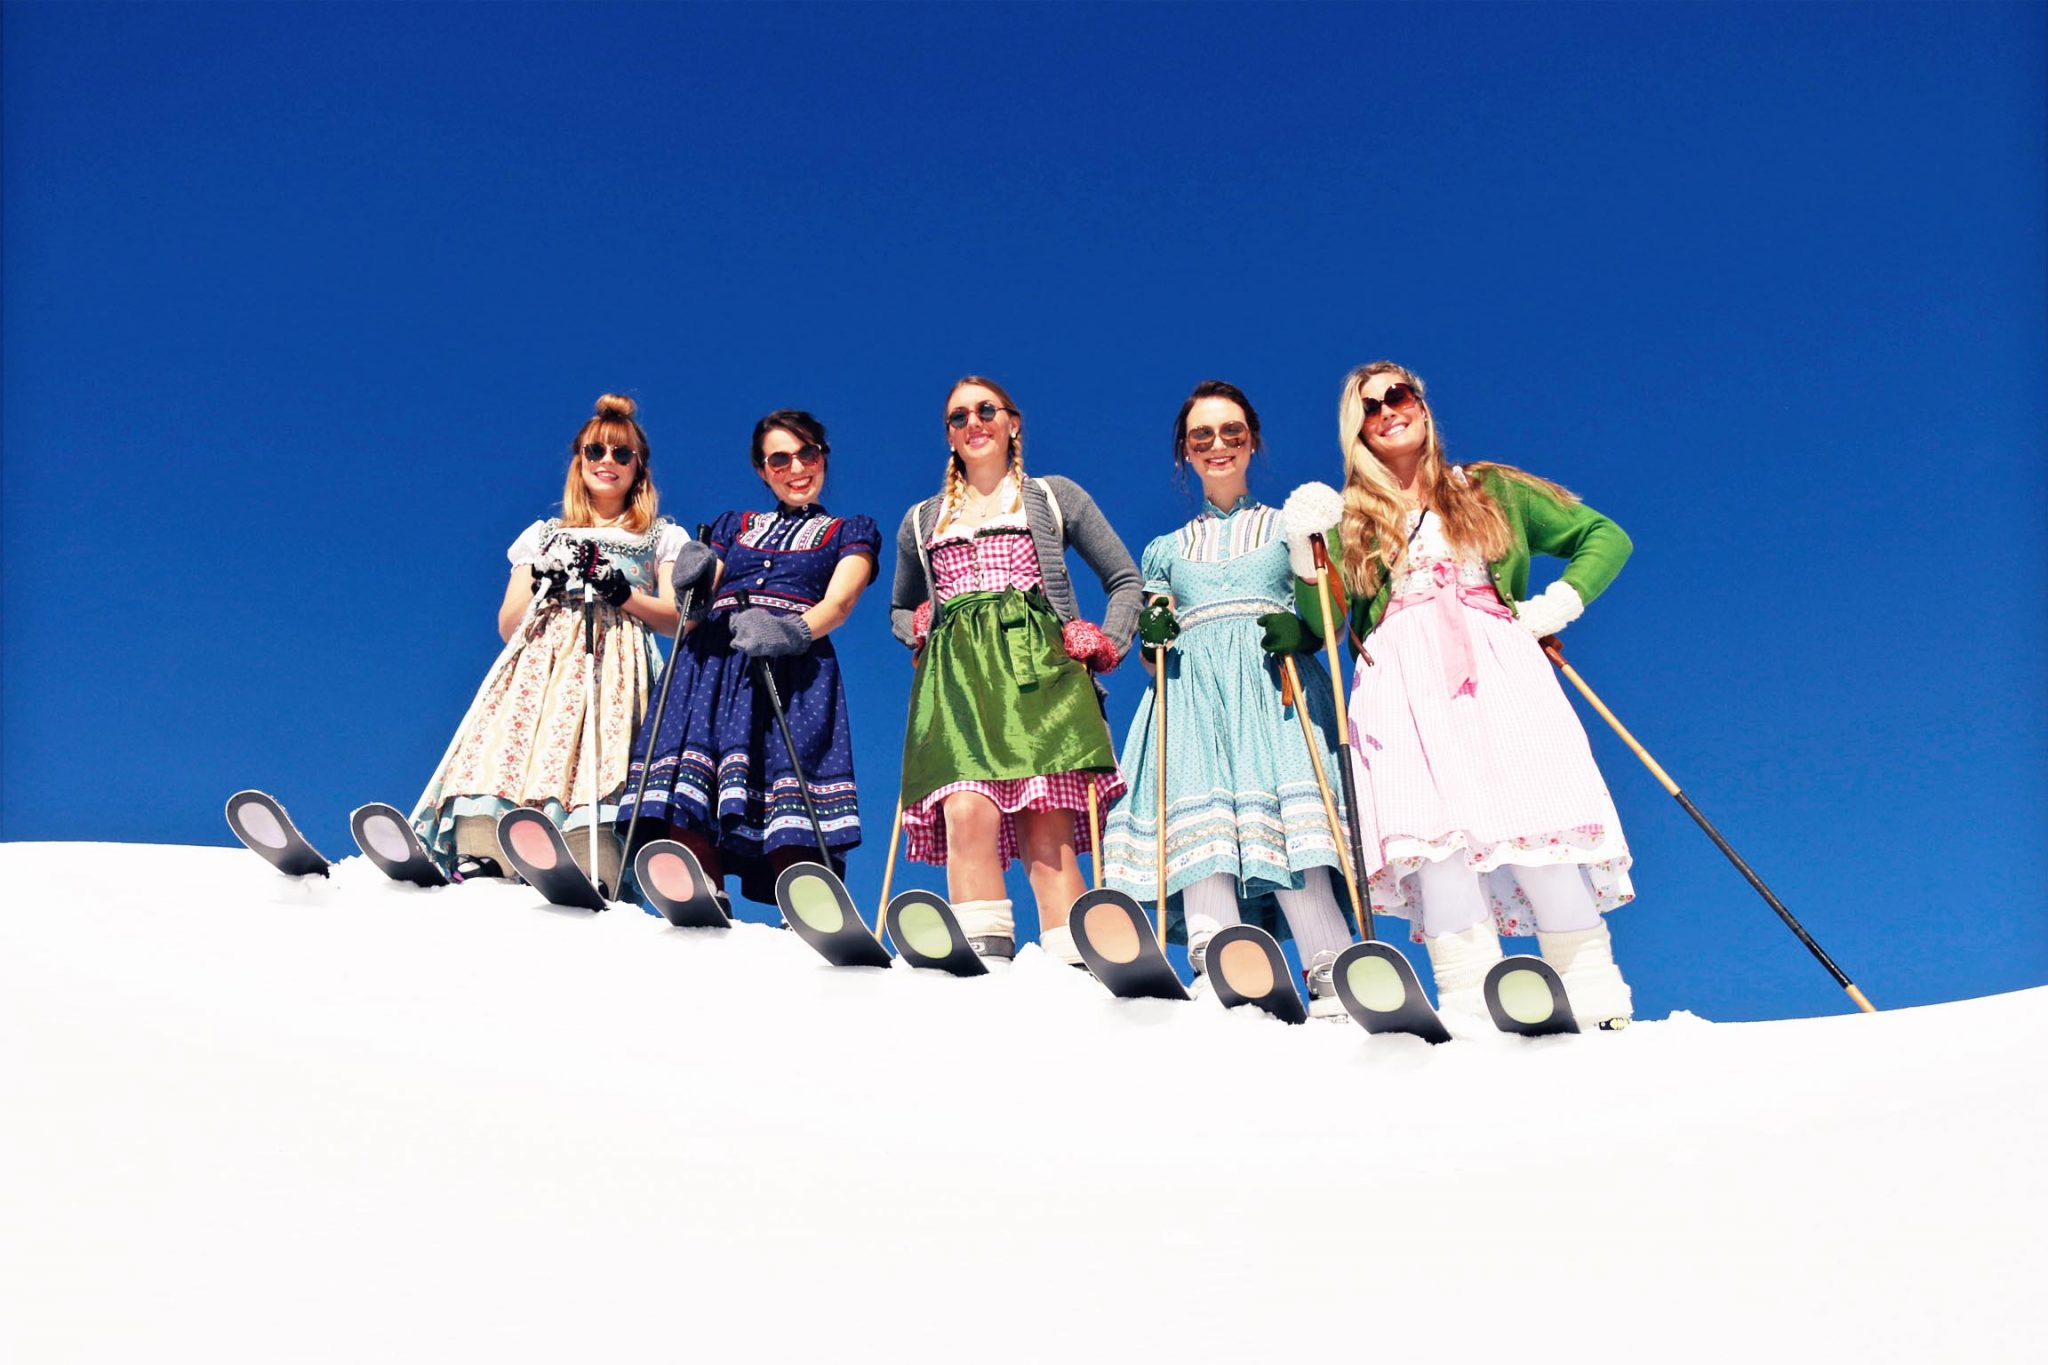 Lech Zürs Aims For World’s Biggest Dirndl Skiing Day